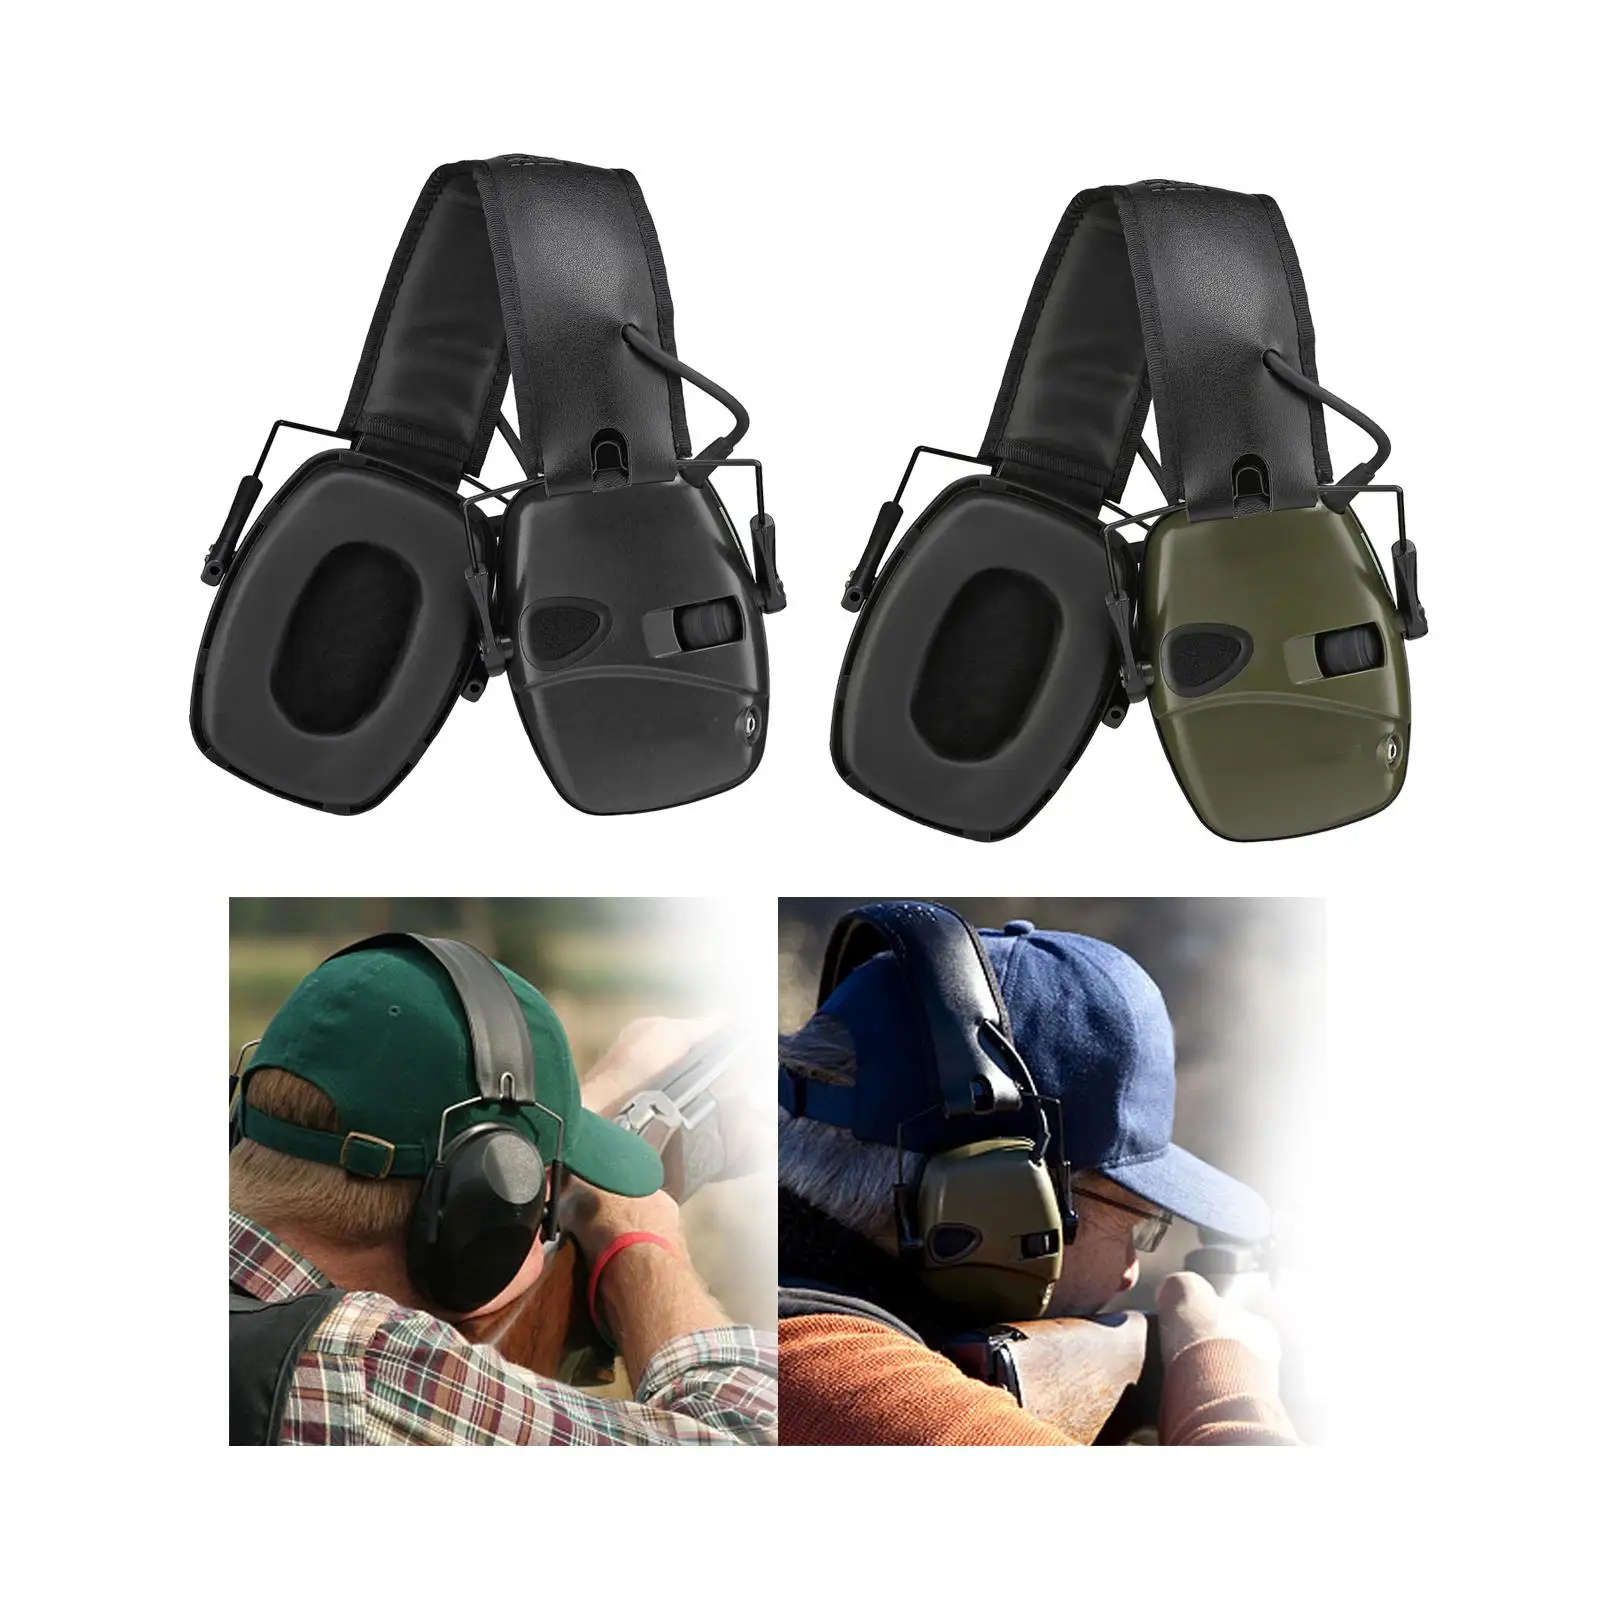 Ear Muffs Folding Noise Cancelling Hearing Protection Adjustable for Shooting Team Activities Manufacturing Woodwork Mowing